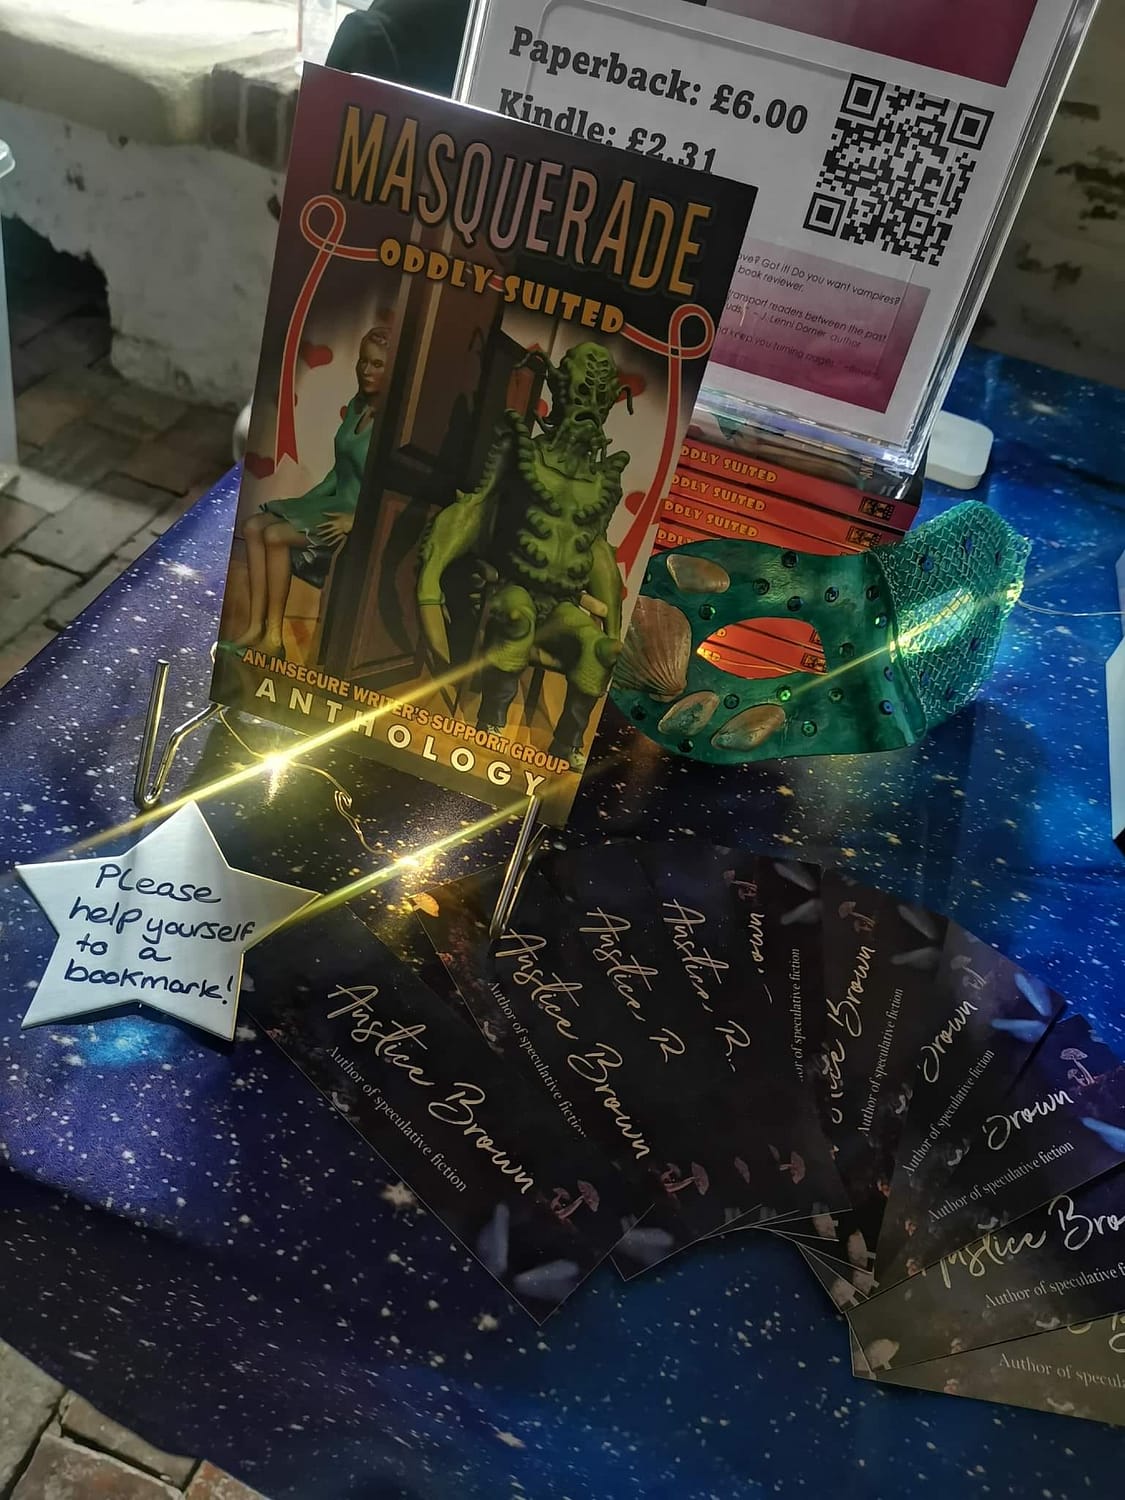 Masquerade: Oddly Suitedanthology on display at Boston Book Fest 2022 with an orangemermaid mask and fairy lights on a galaxy print table cloth